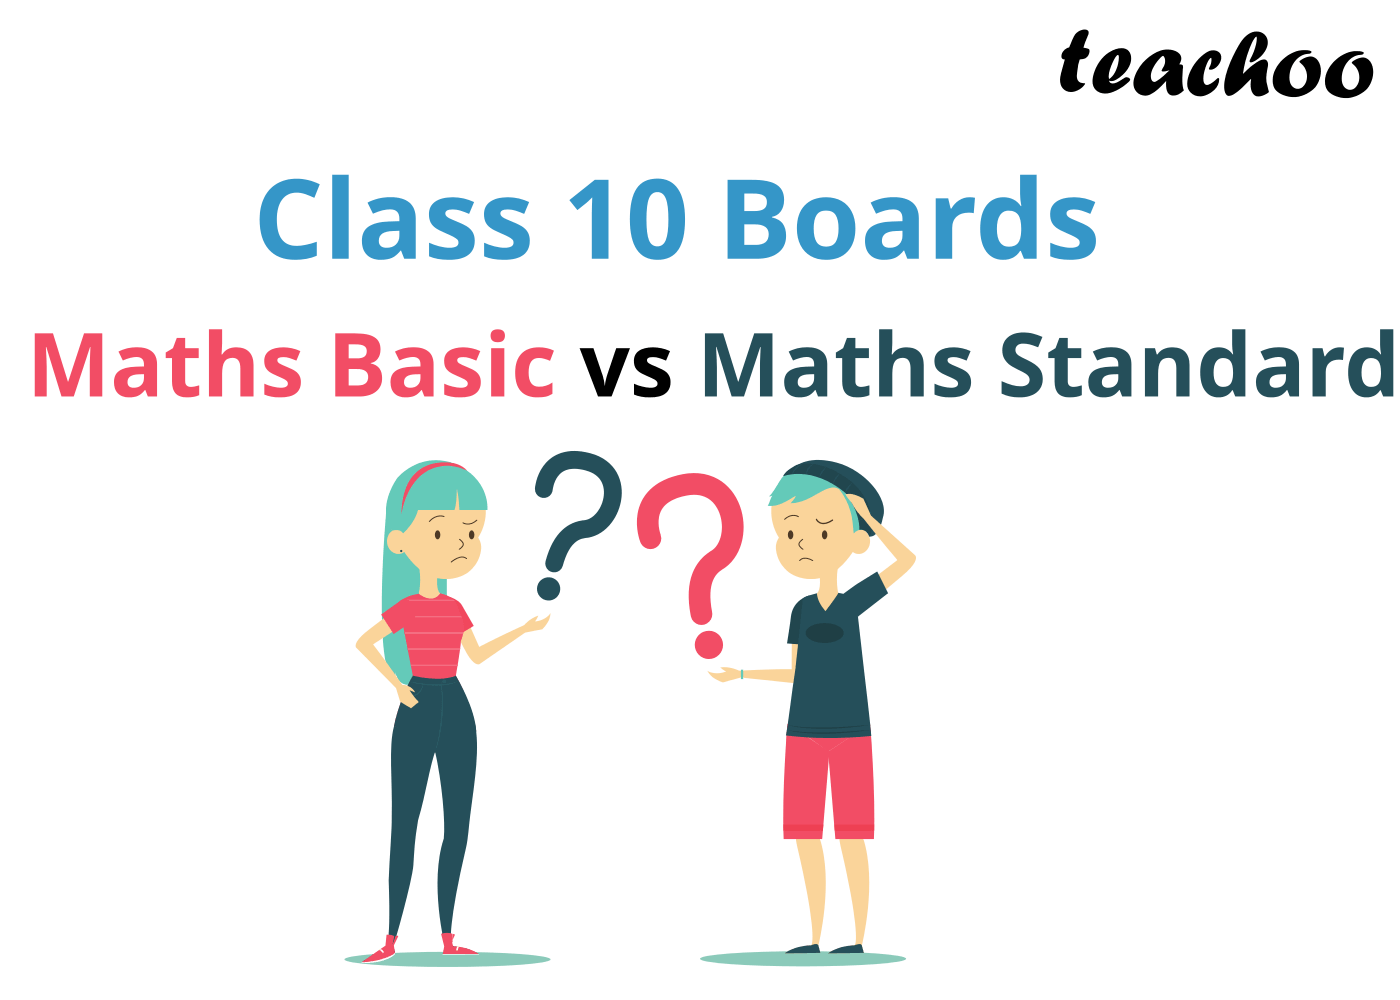 Maths Basic vs Maths Standard - Class 10 Boards - Check out the common questions and how to choose